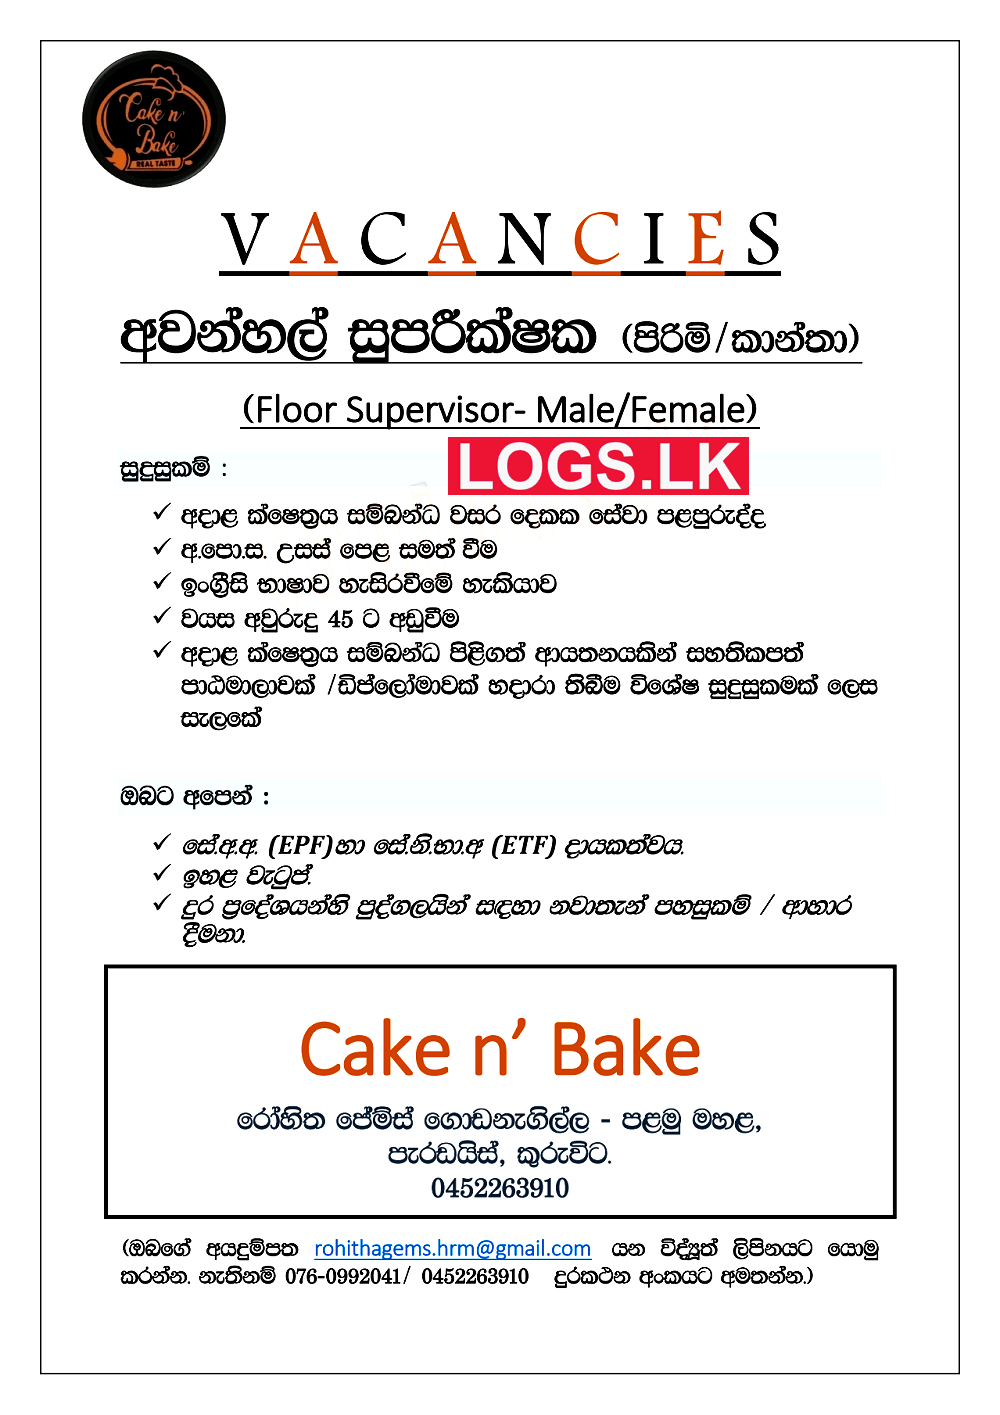 Career -Baker Job Vacancies| HRKnights Consulting Opportunity for  professional cake decorator jobs in trivandrum – HR Knights Consulting  (OPC) PVT LTD